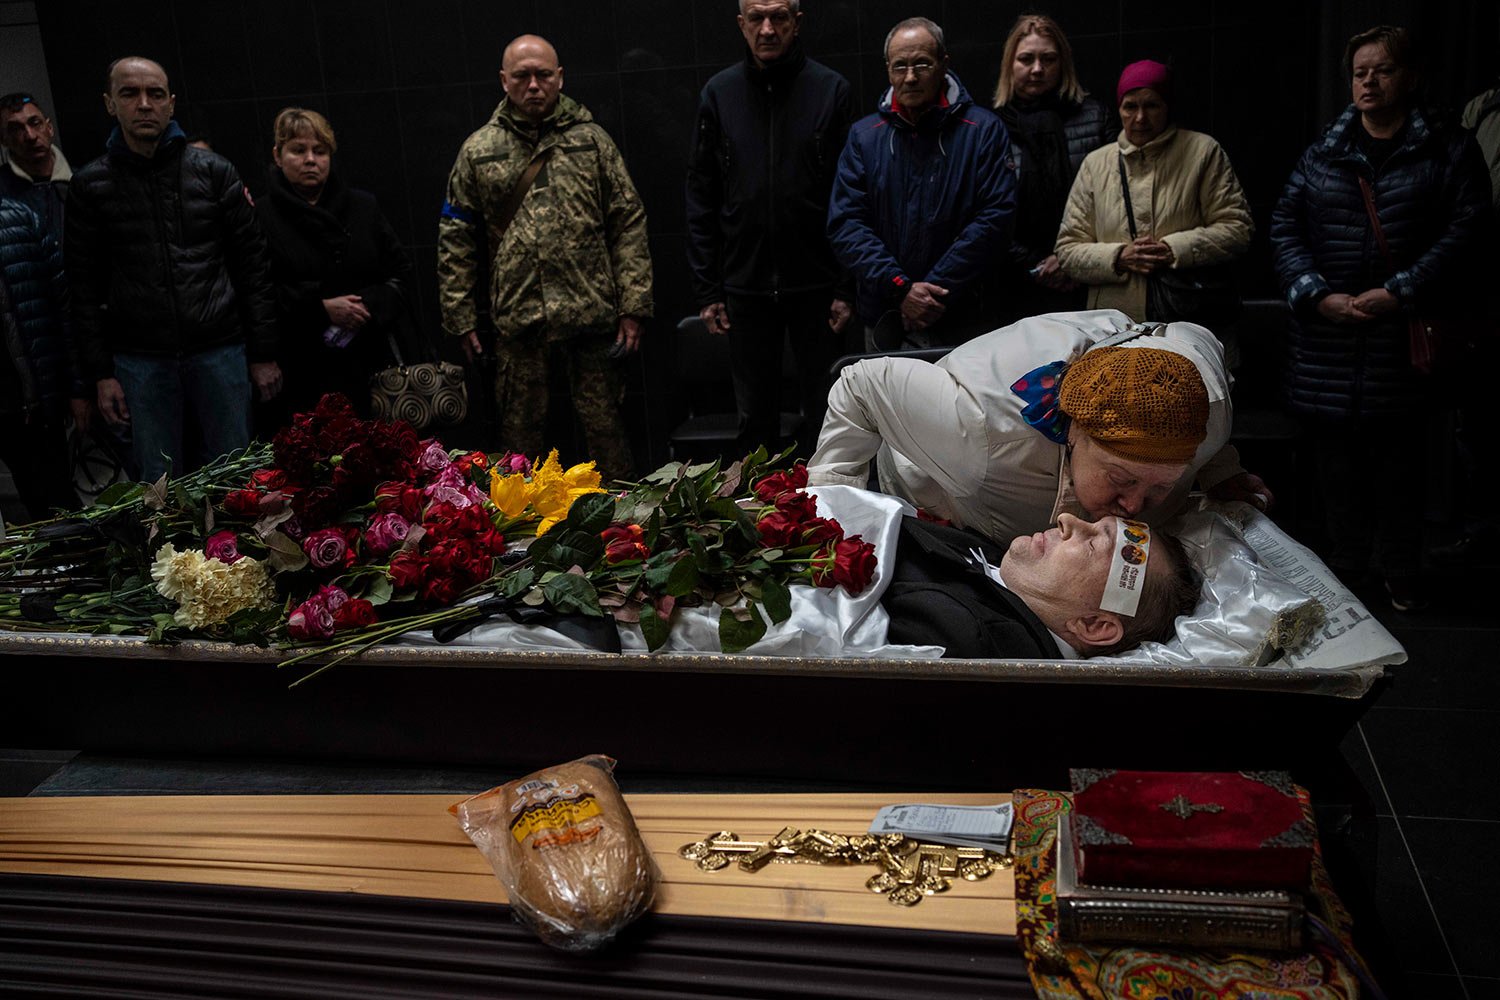  Natalya kisses her brother Sergiy Muravyts'kyi, 61, who was killed by Russian soldiers in the village of Mriya, which means Dream, in Ukrainian, during a ceremony before his cremation in Baikove cemetery, Kyiv, Ukraine, Thursday, March 24, 2022. (AP